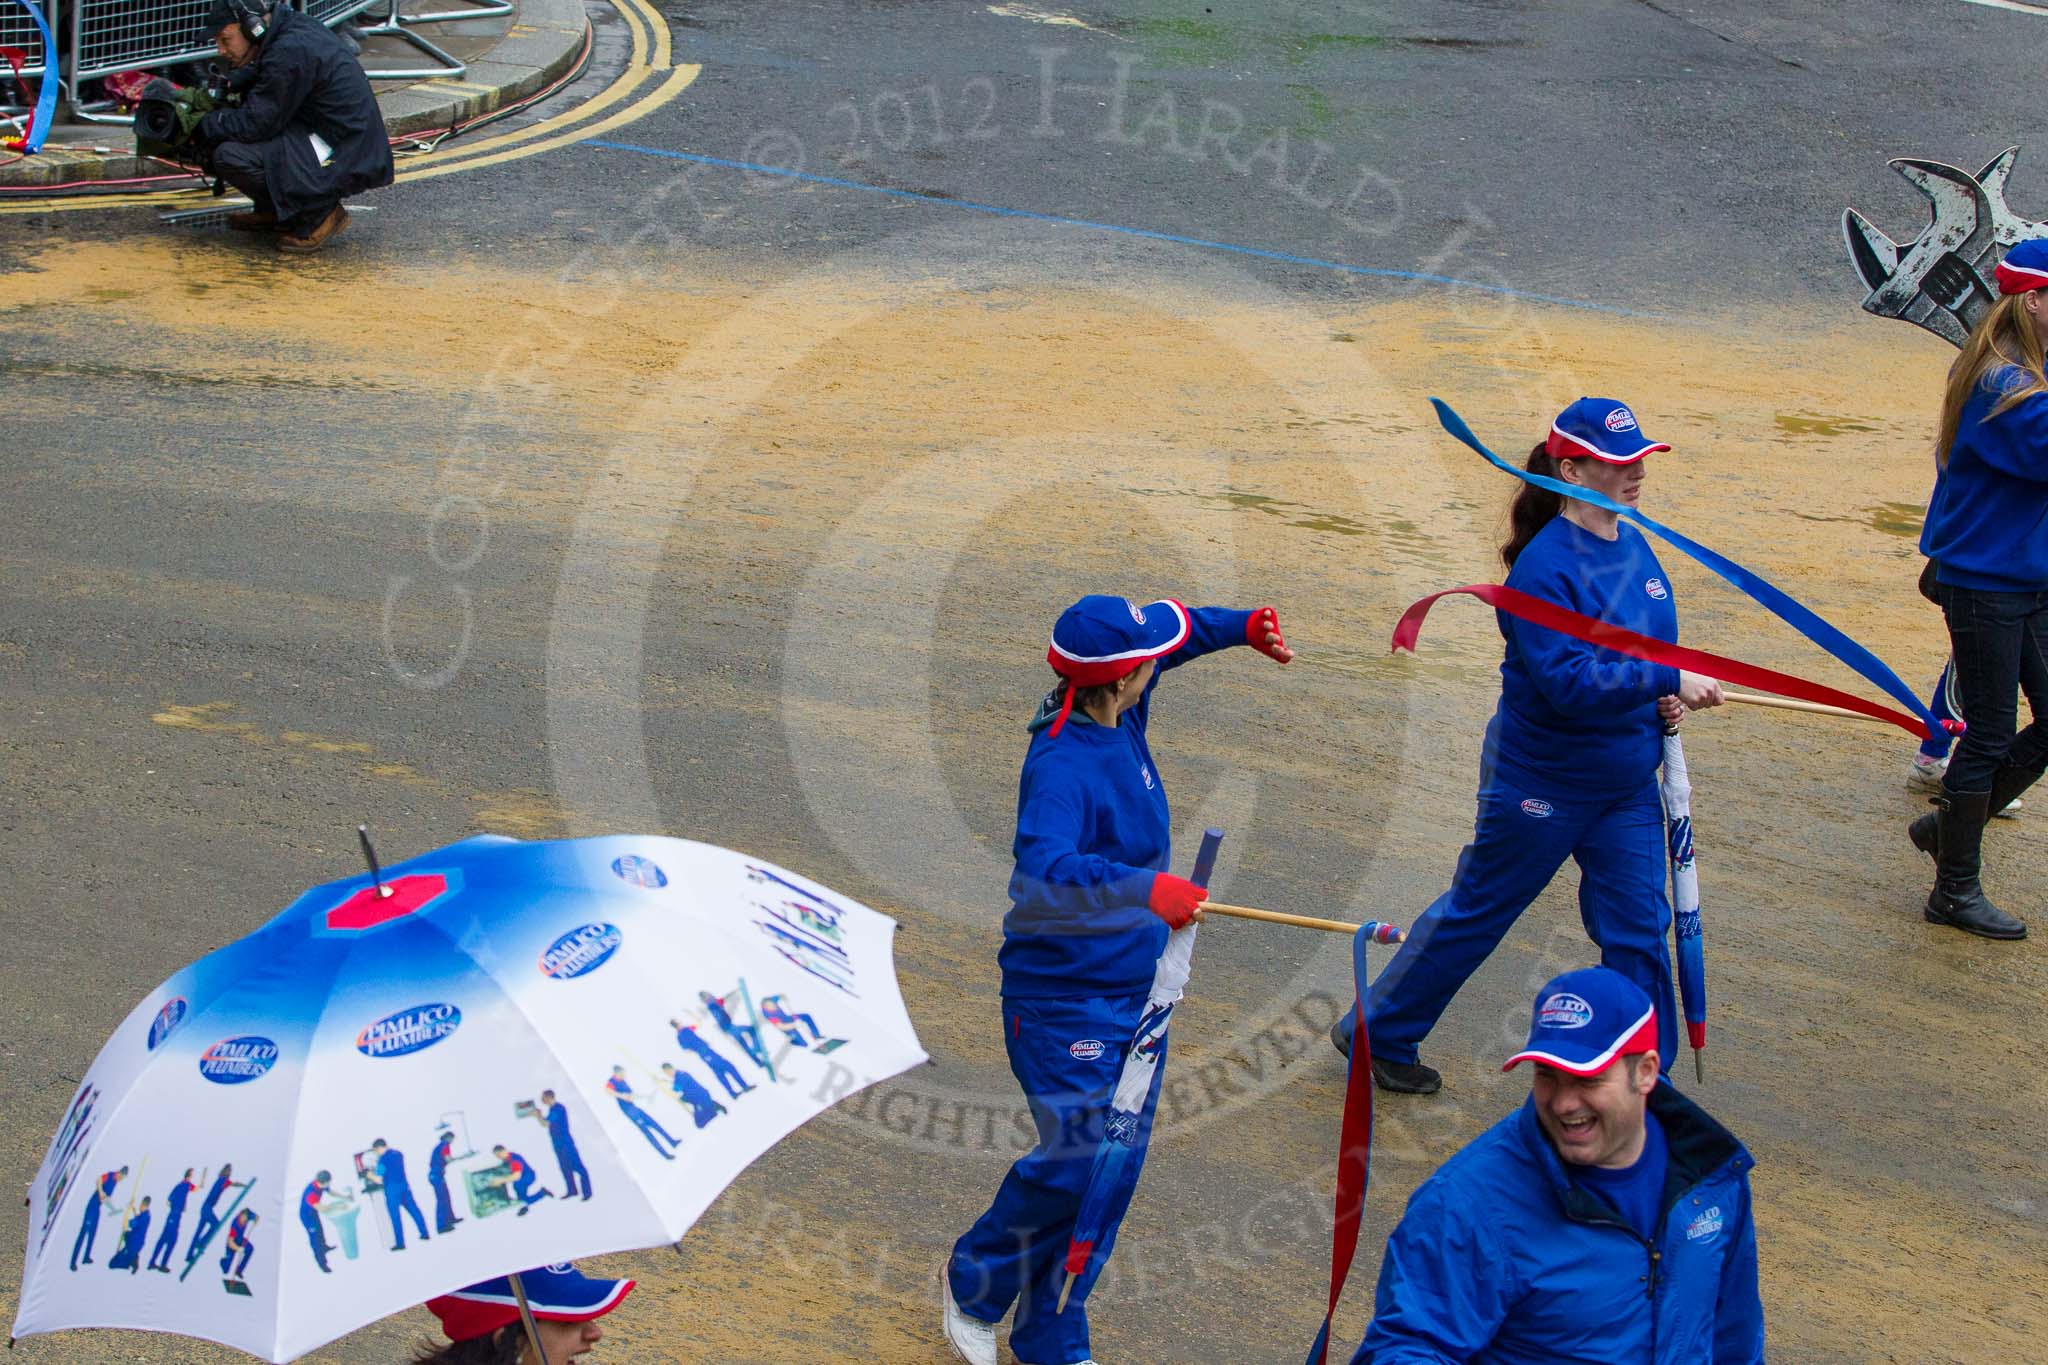 Lord Mayor's Show 2012: Entry 107 - Pimlico Plumbers..
Press stand opposite Mansion House, City of London,
London,
Greater London,
United Kingdom,
on 10 November 2012 at 11:54, image #1532